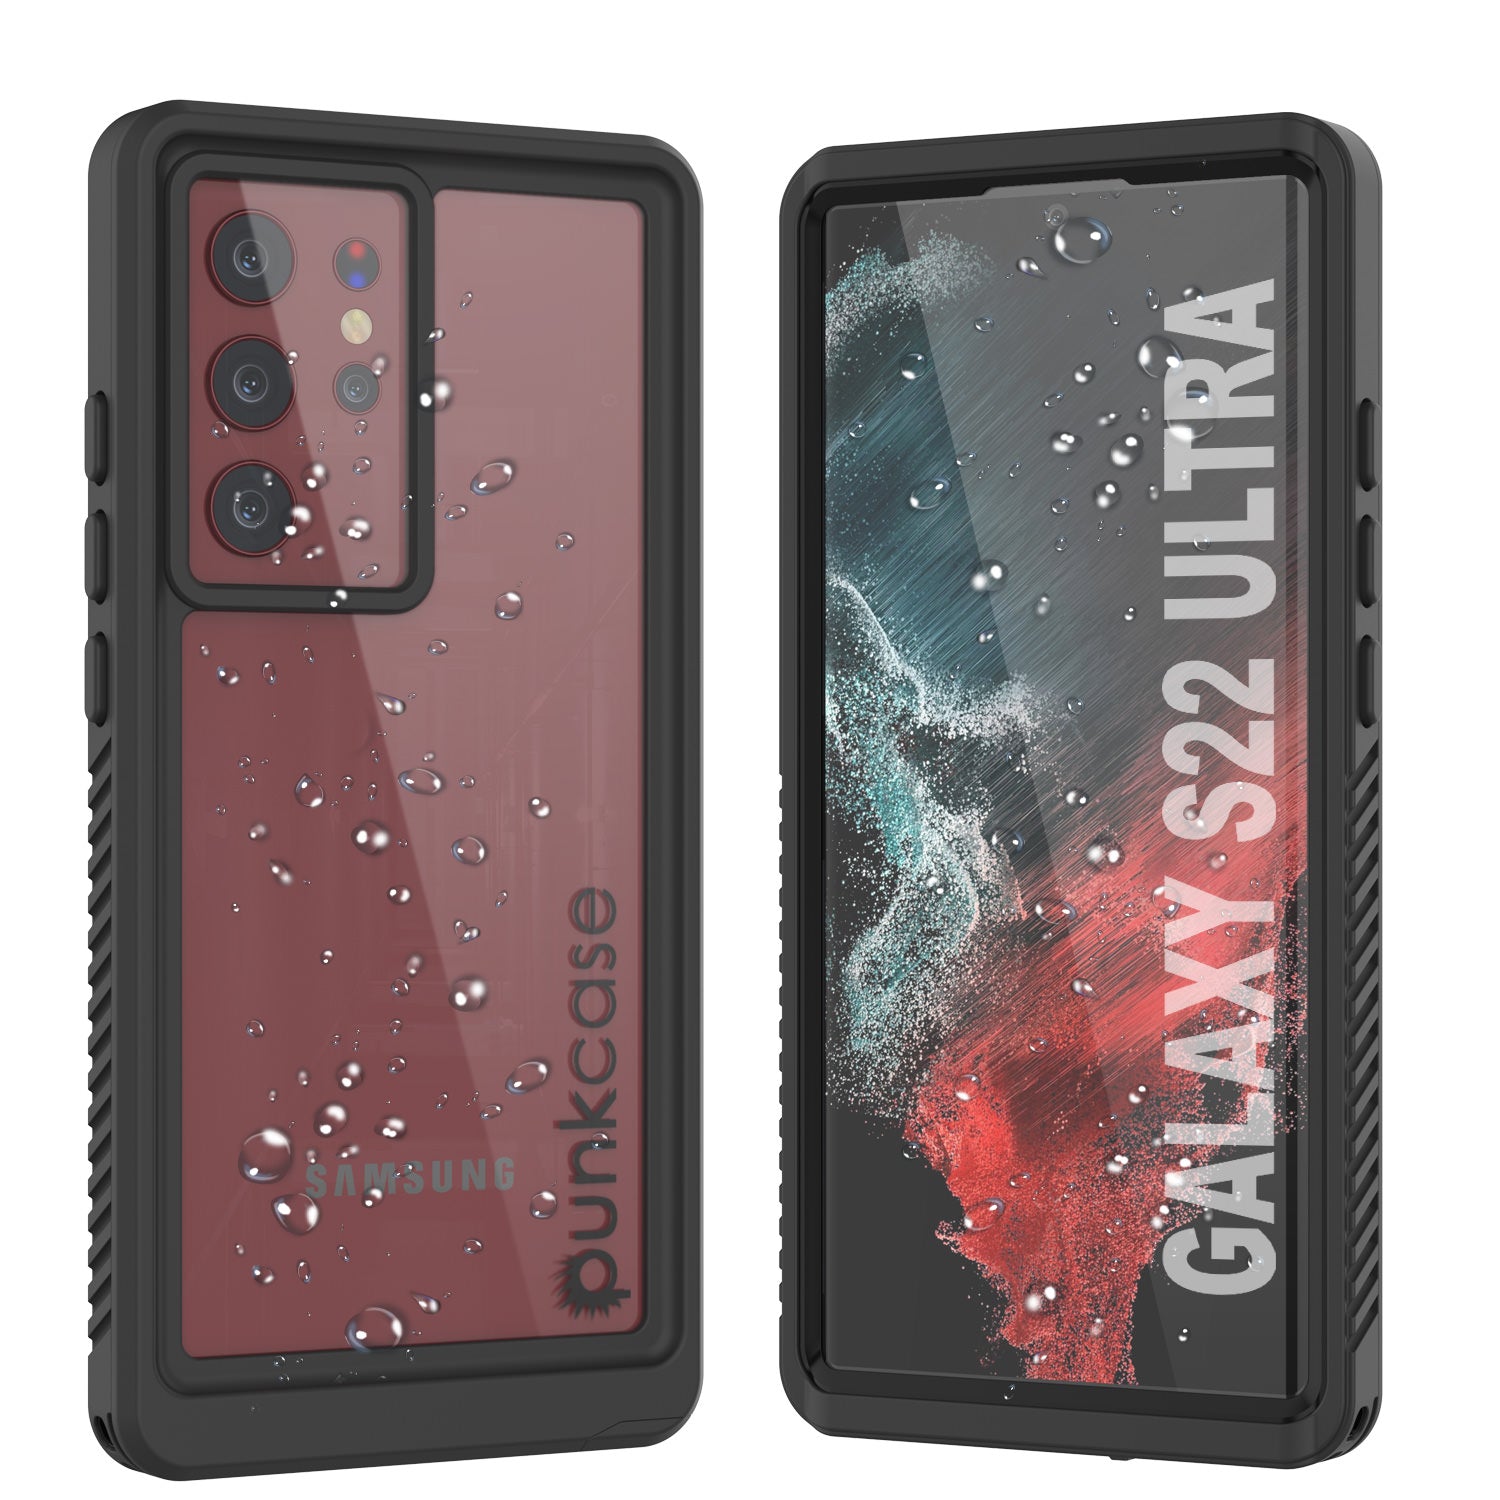 Punkcase Galaxy S22 Ultra Metal Case, Heavy Duty Military Grade Rugged Armor Cover [White]